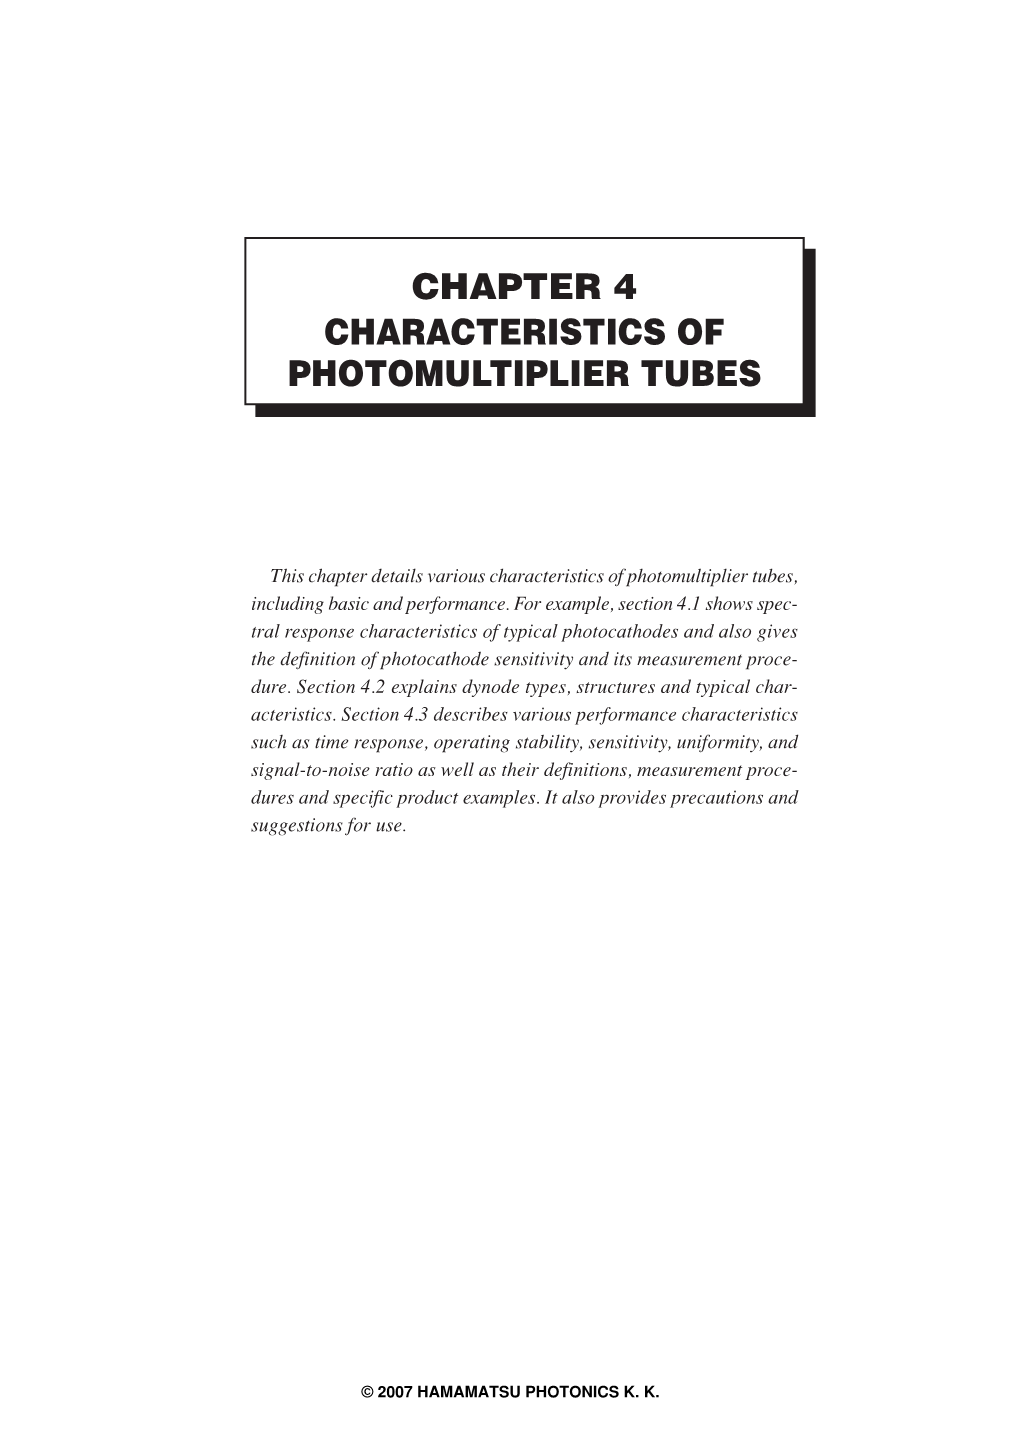 Chapter 4 Characteristics of Photomultiplier Tubes